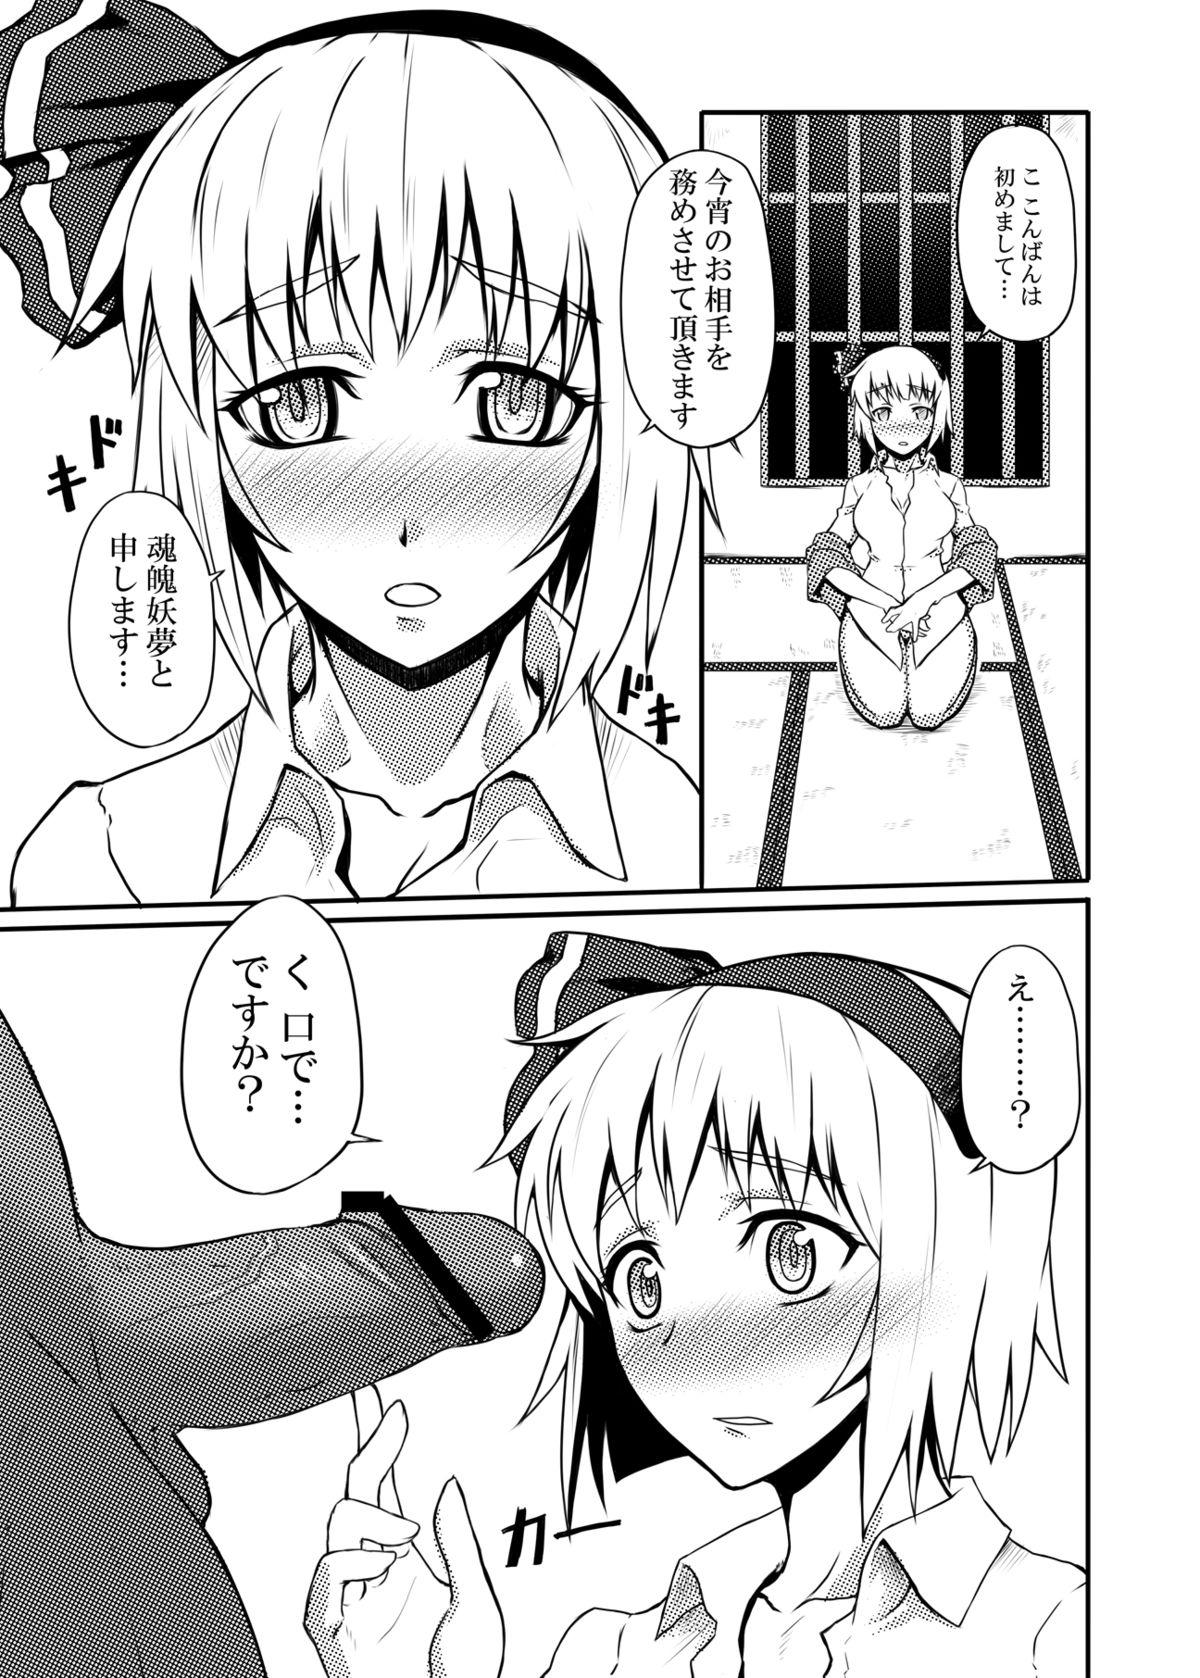 Young Tits Touhou Project no Hon Soushuuhen - Touhou project Ex Girlfriends - Page 8